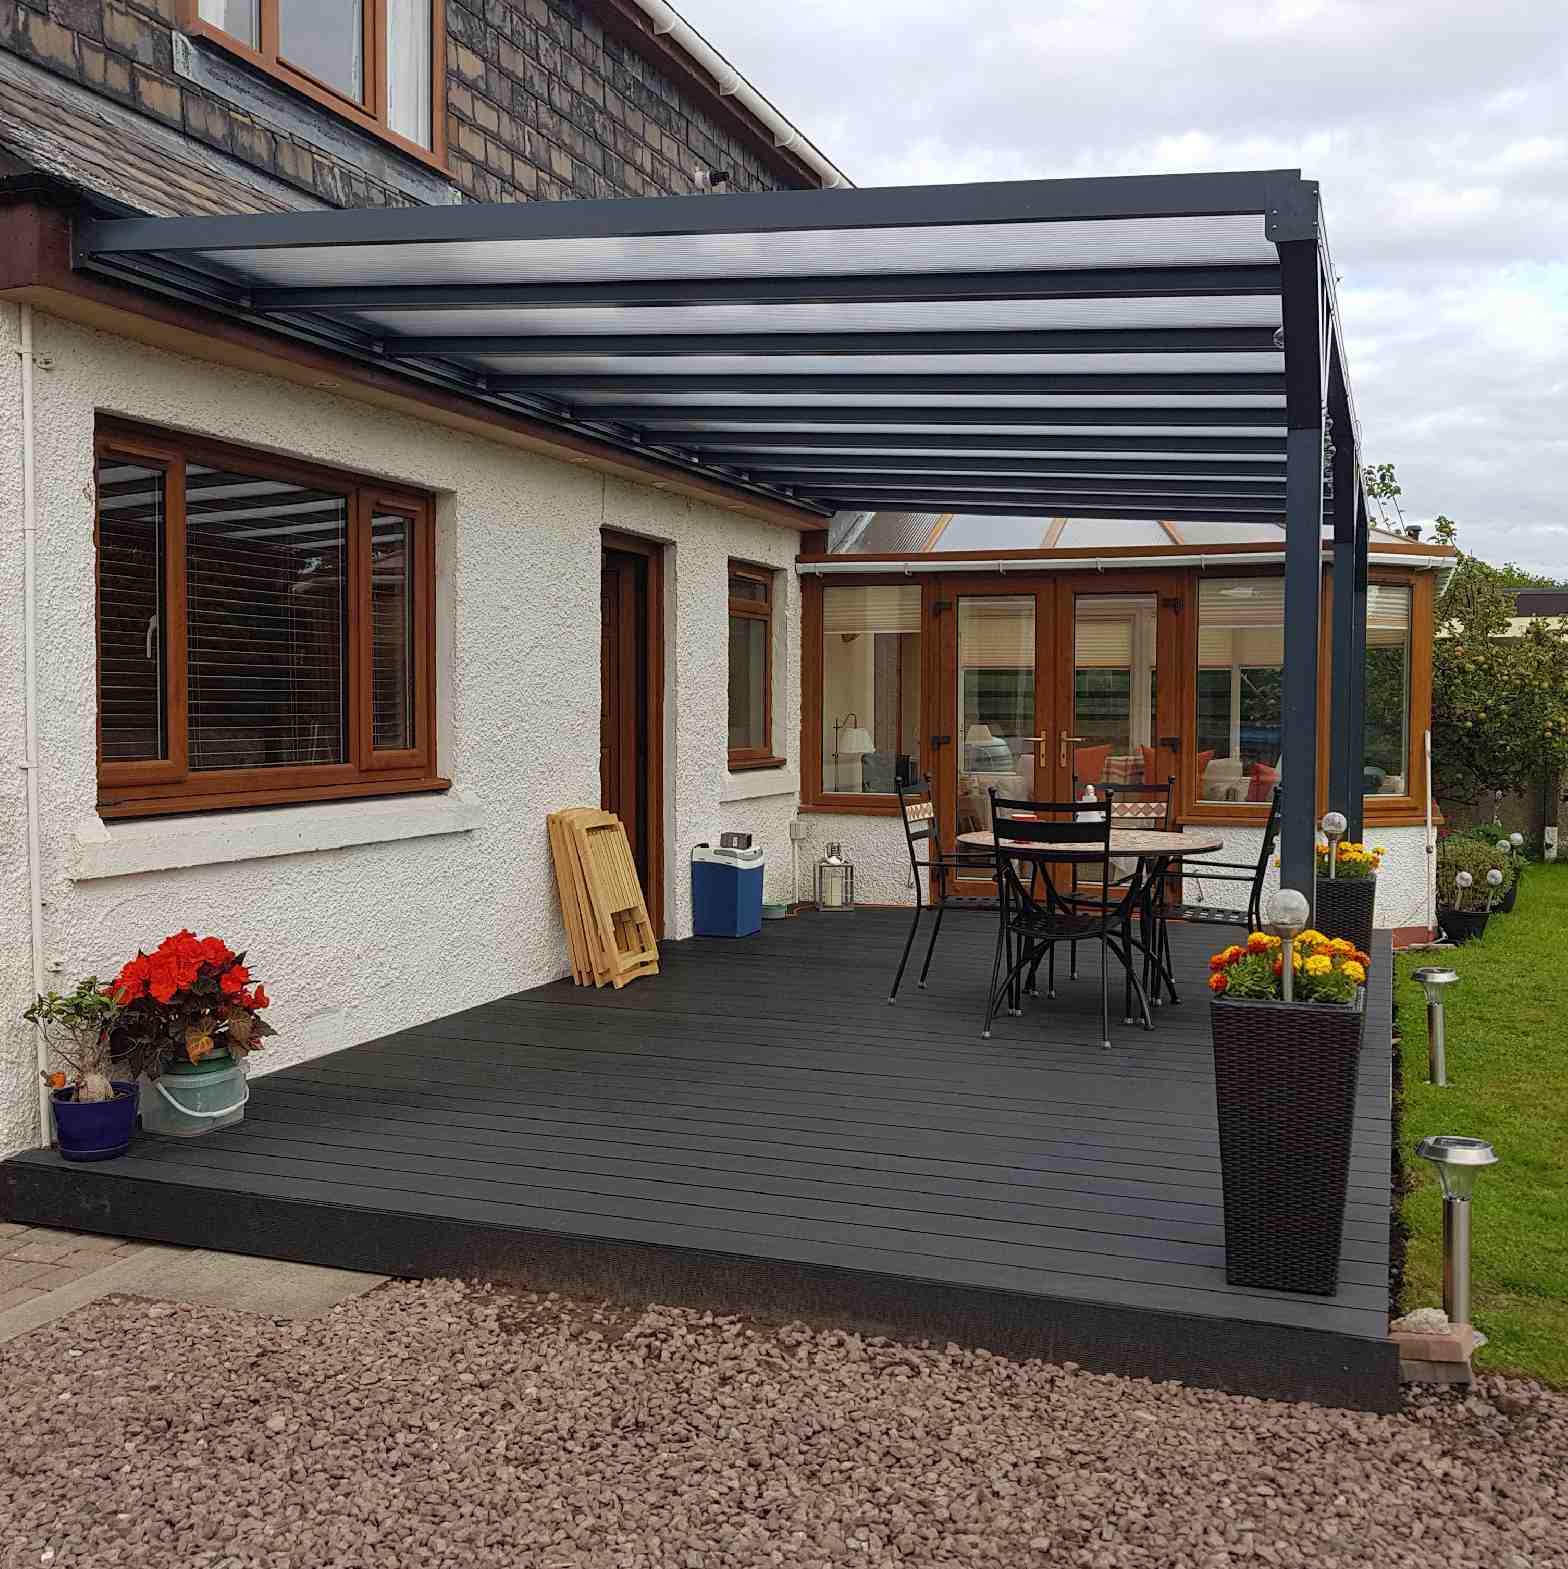 Buy Omega Verandah, Anthracite Grey, 16mm Polycarbonate Glazing - 8.4m (W) x 3.5m (P), (4) Supporting Posts online today